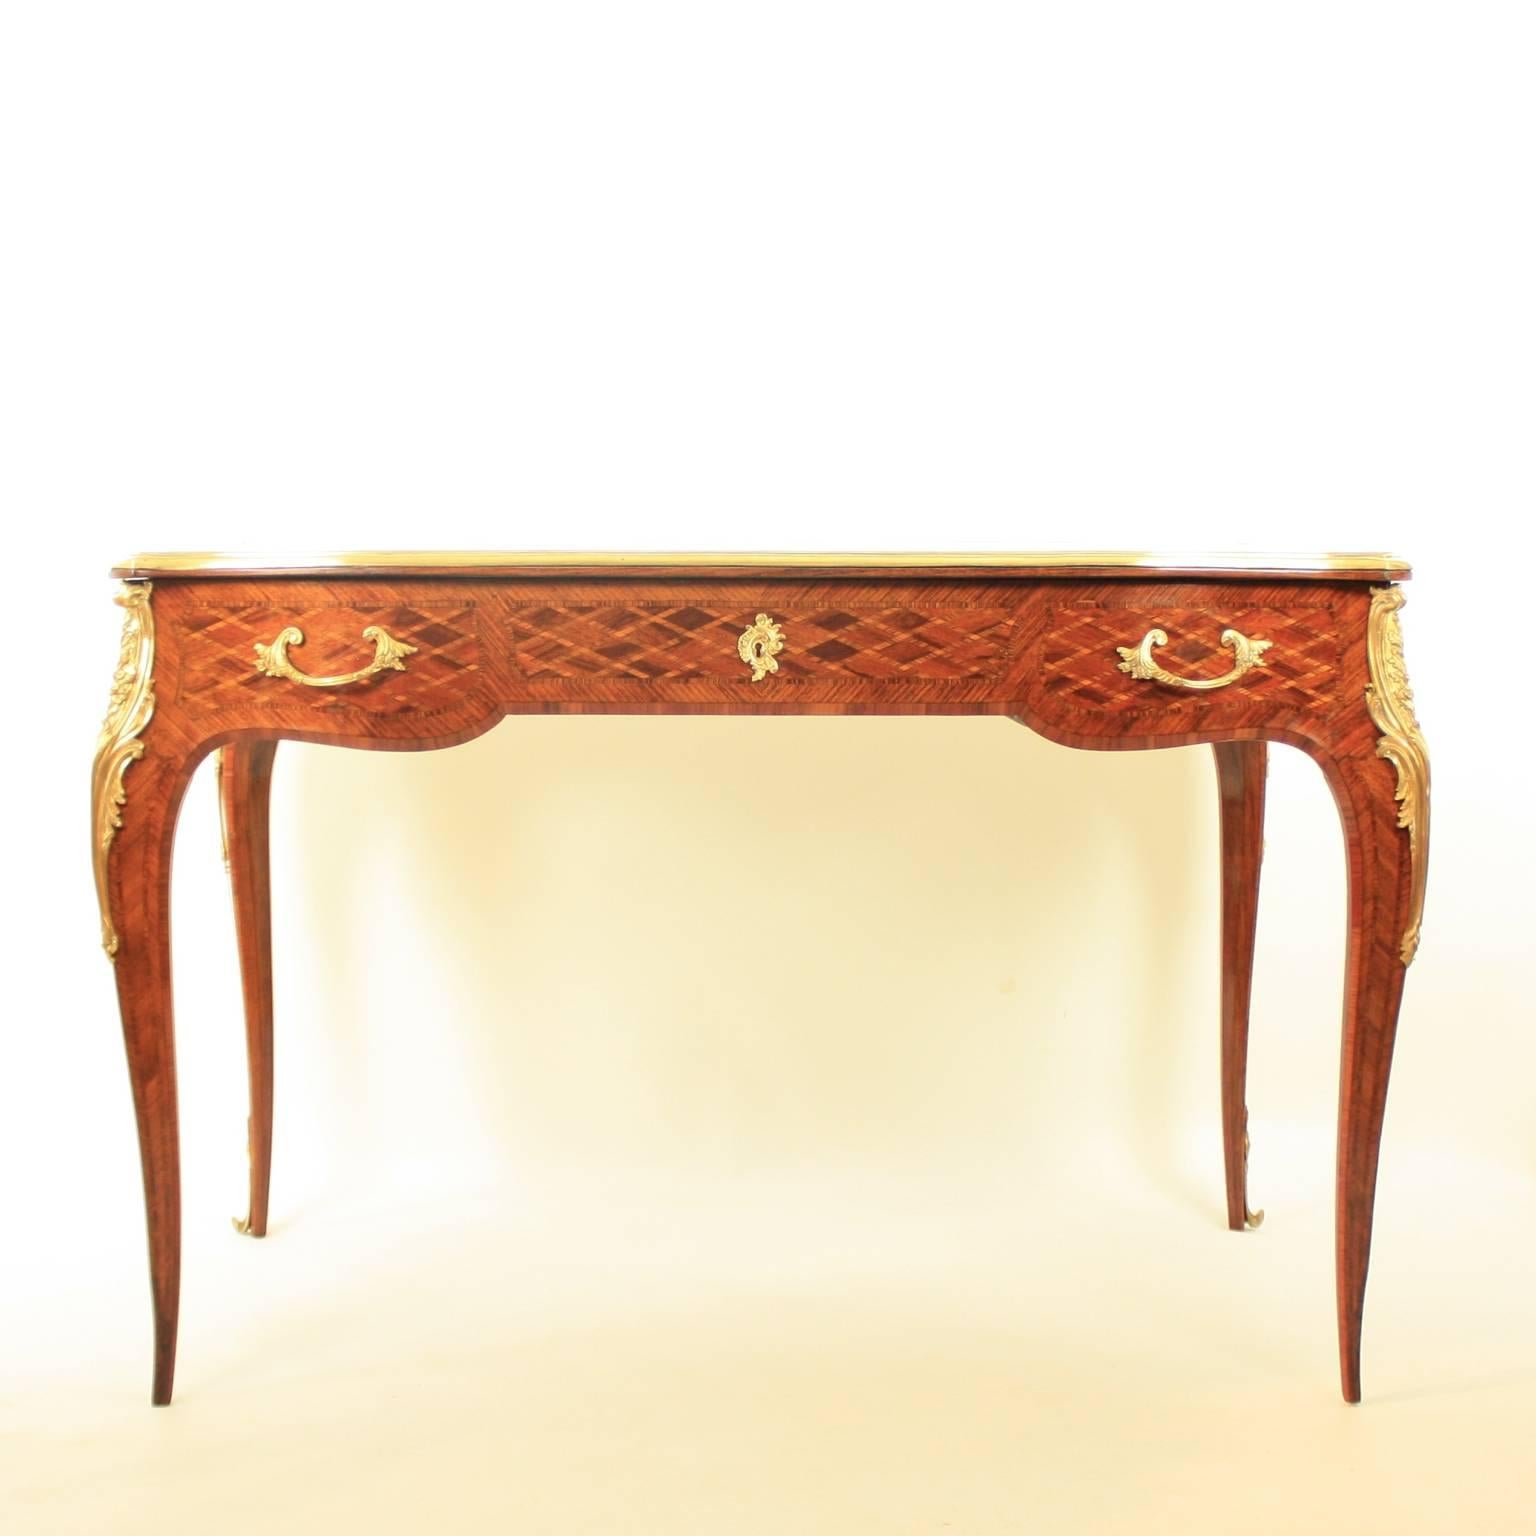 Small Louis XV Style Gilt Bronze Mounted Marquetry Bureau Plat or Desk 4